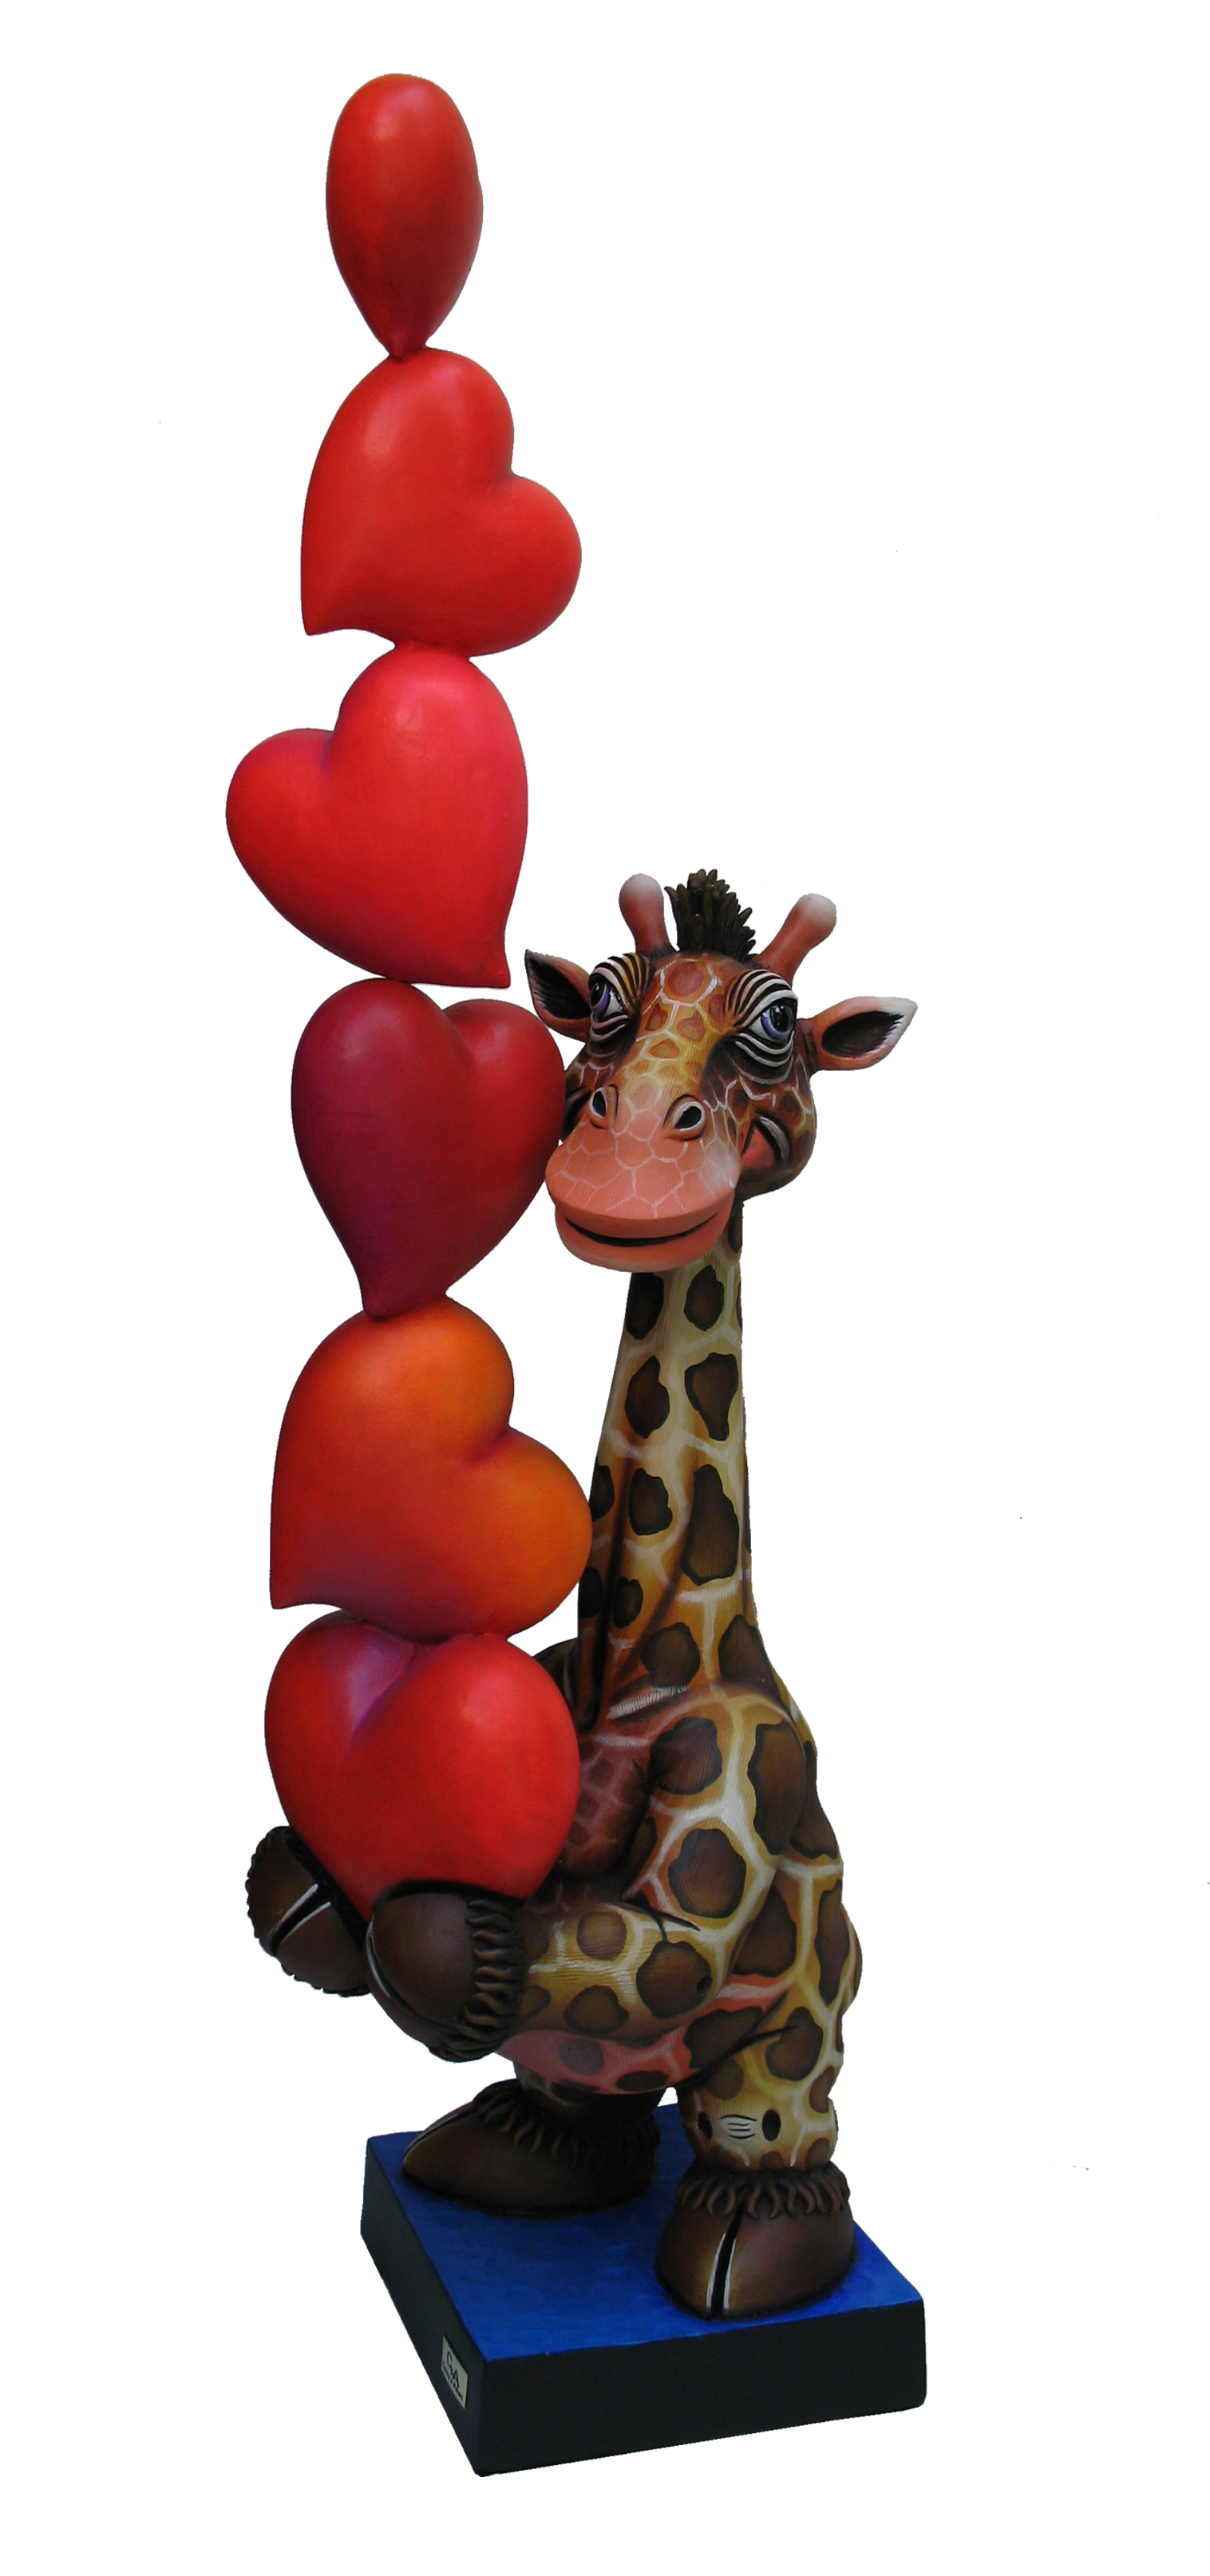 Signed, limited edition giraffe with hearts sculpture